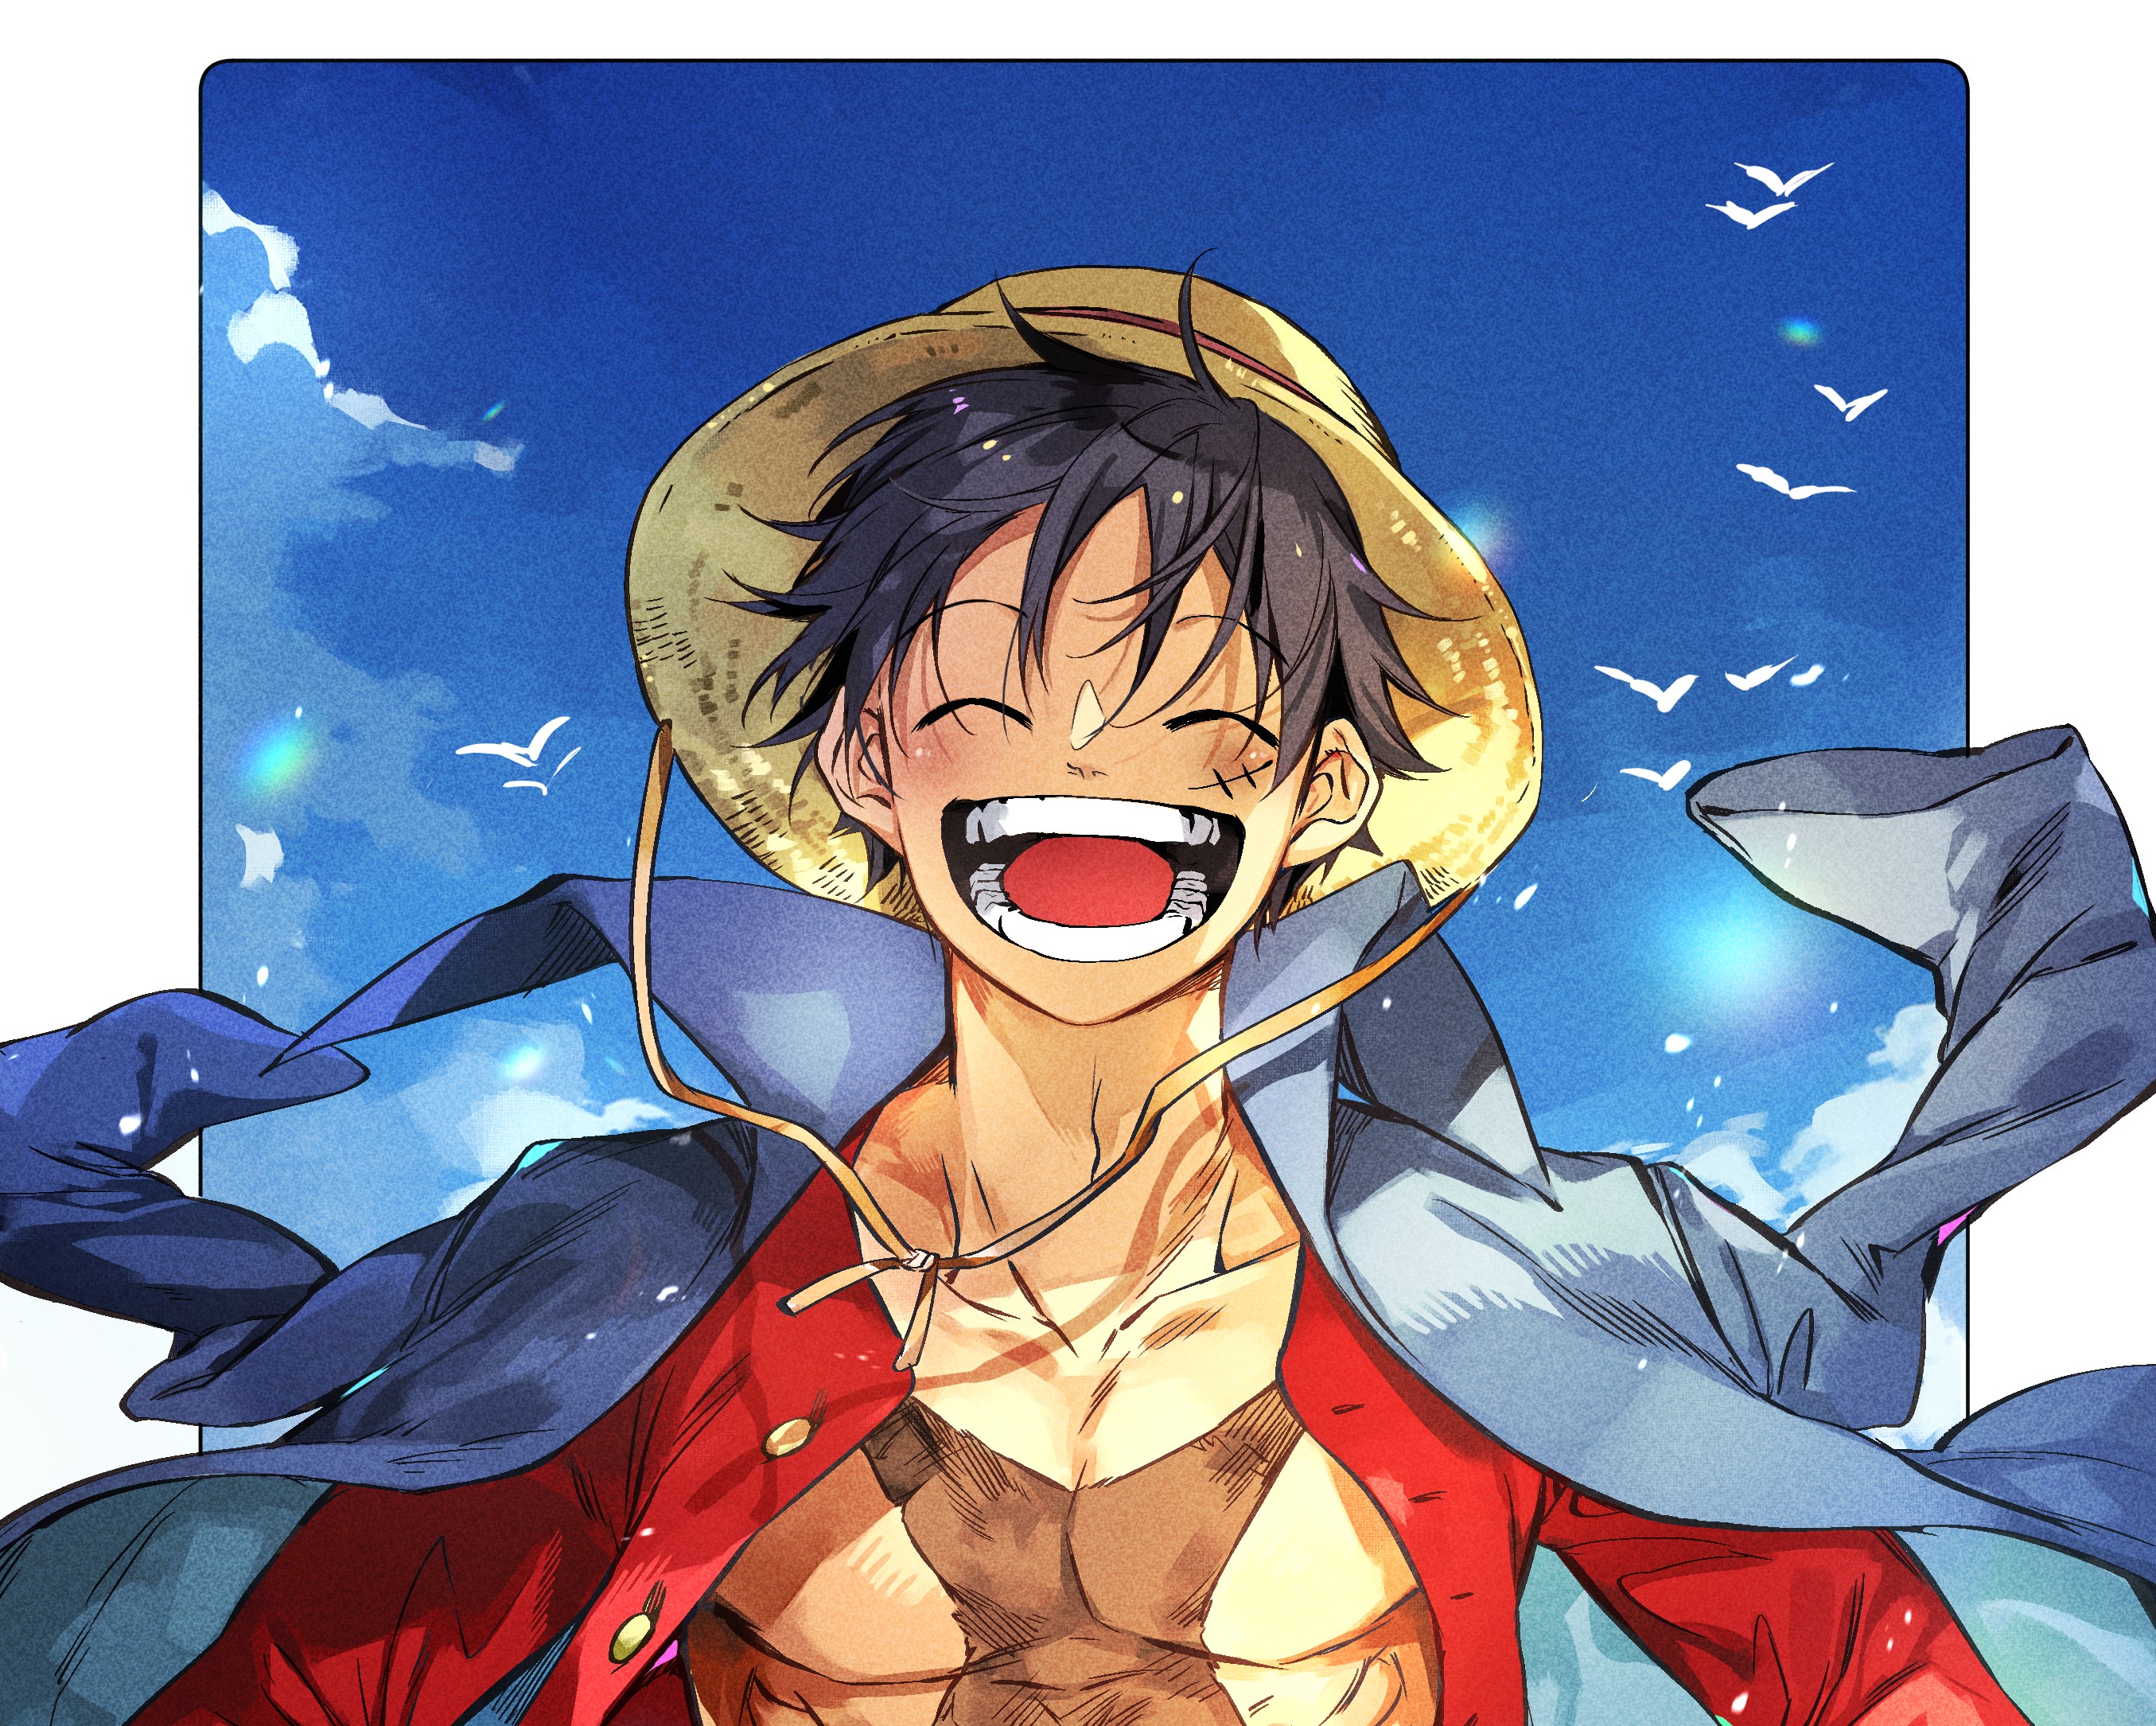 Monkey D. Luffy Wallpapers and Backgrounds